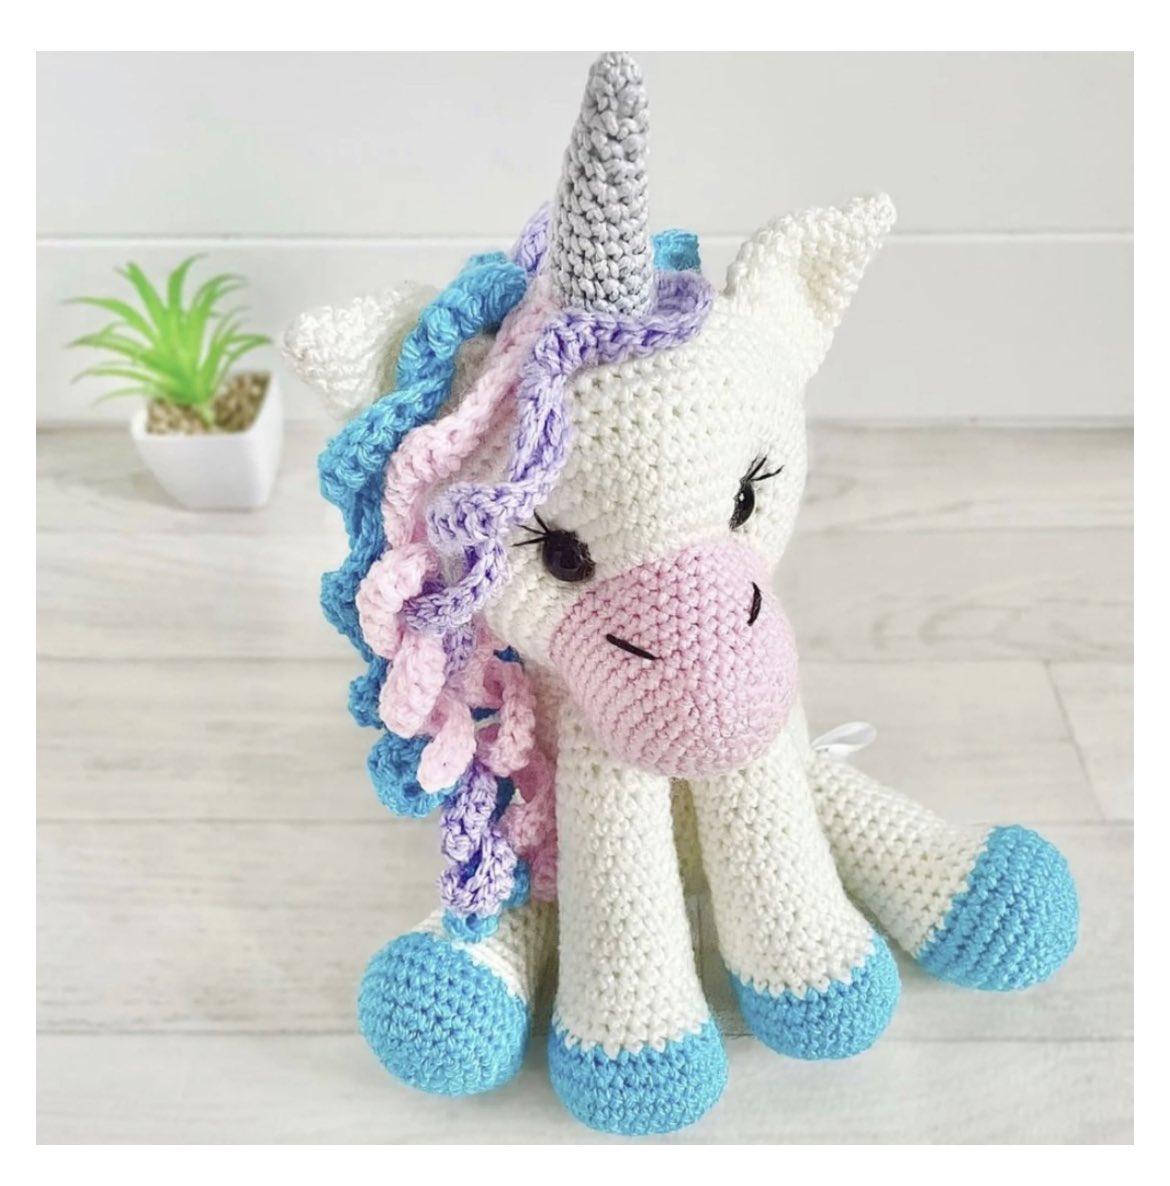 My designing adventures began right here, with this adorable, crochet unicorn. Born in 2016, she was a request by my own daughter Ellie 🦄 

Why not make your own?

elliescraftboutique.patternbyetsy.com/listing/614682…

#crafthour #handmadehour #doubleknitting
#crochetunicorn #amigurumi #stylecraft